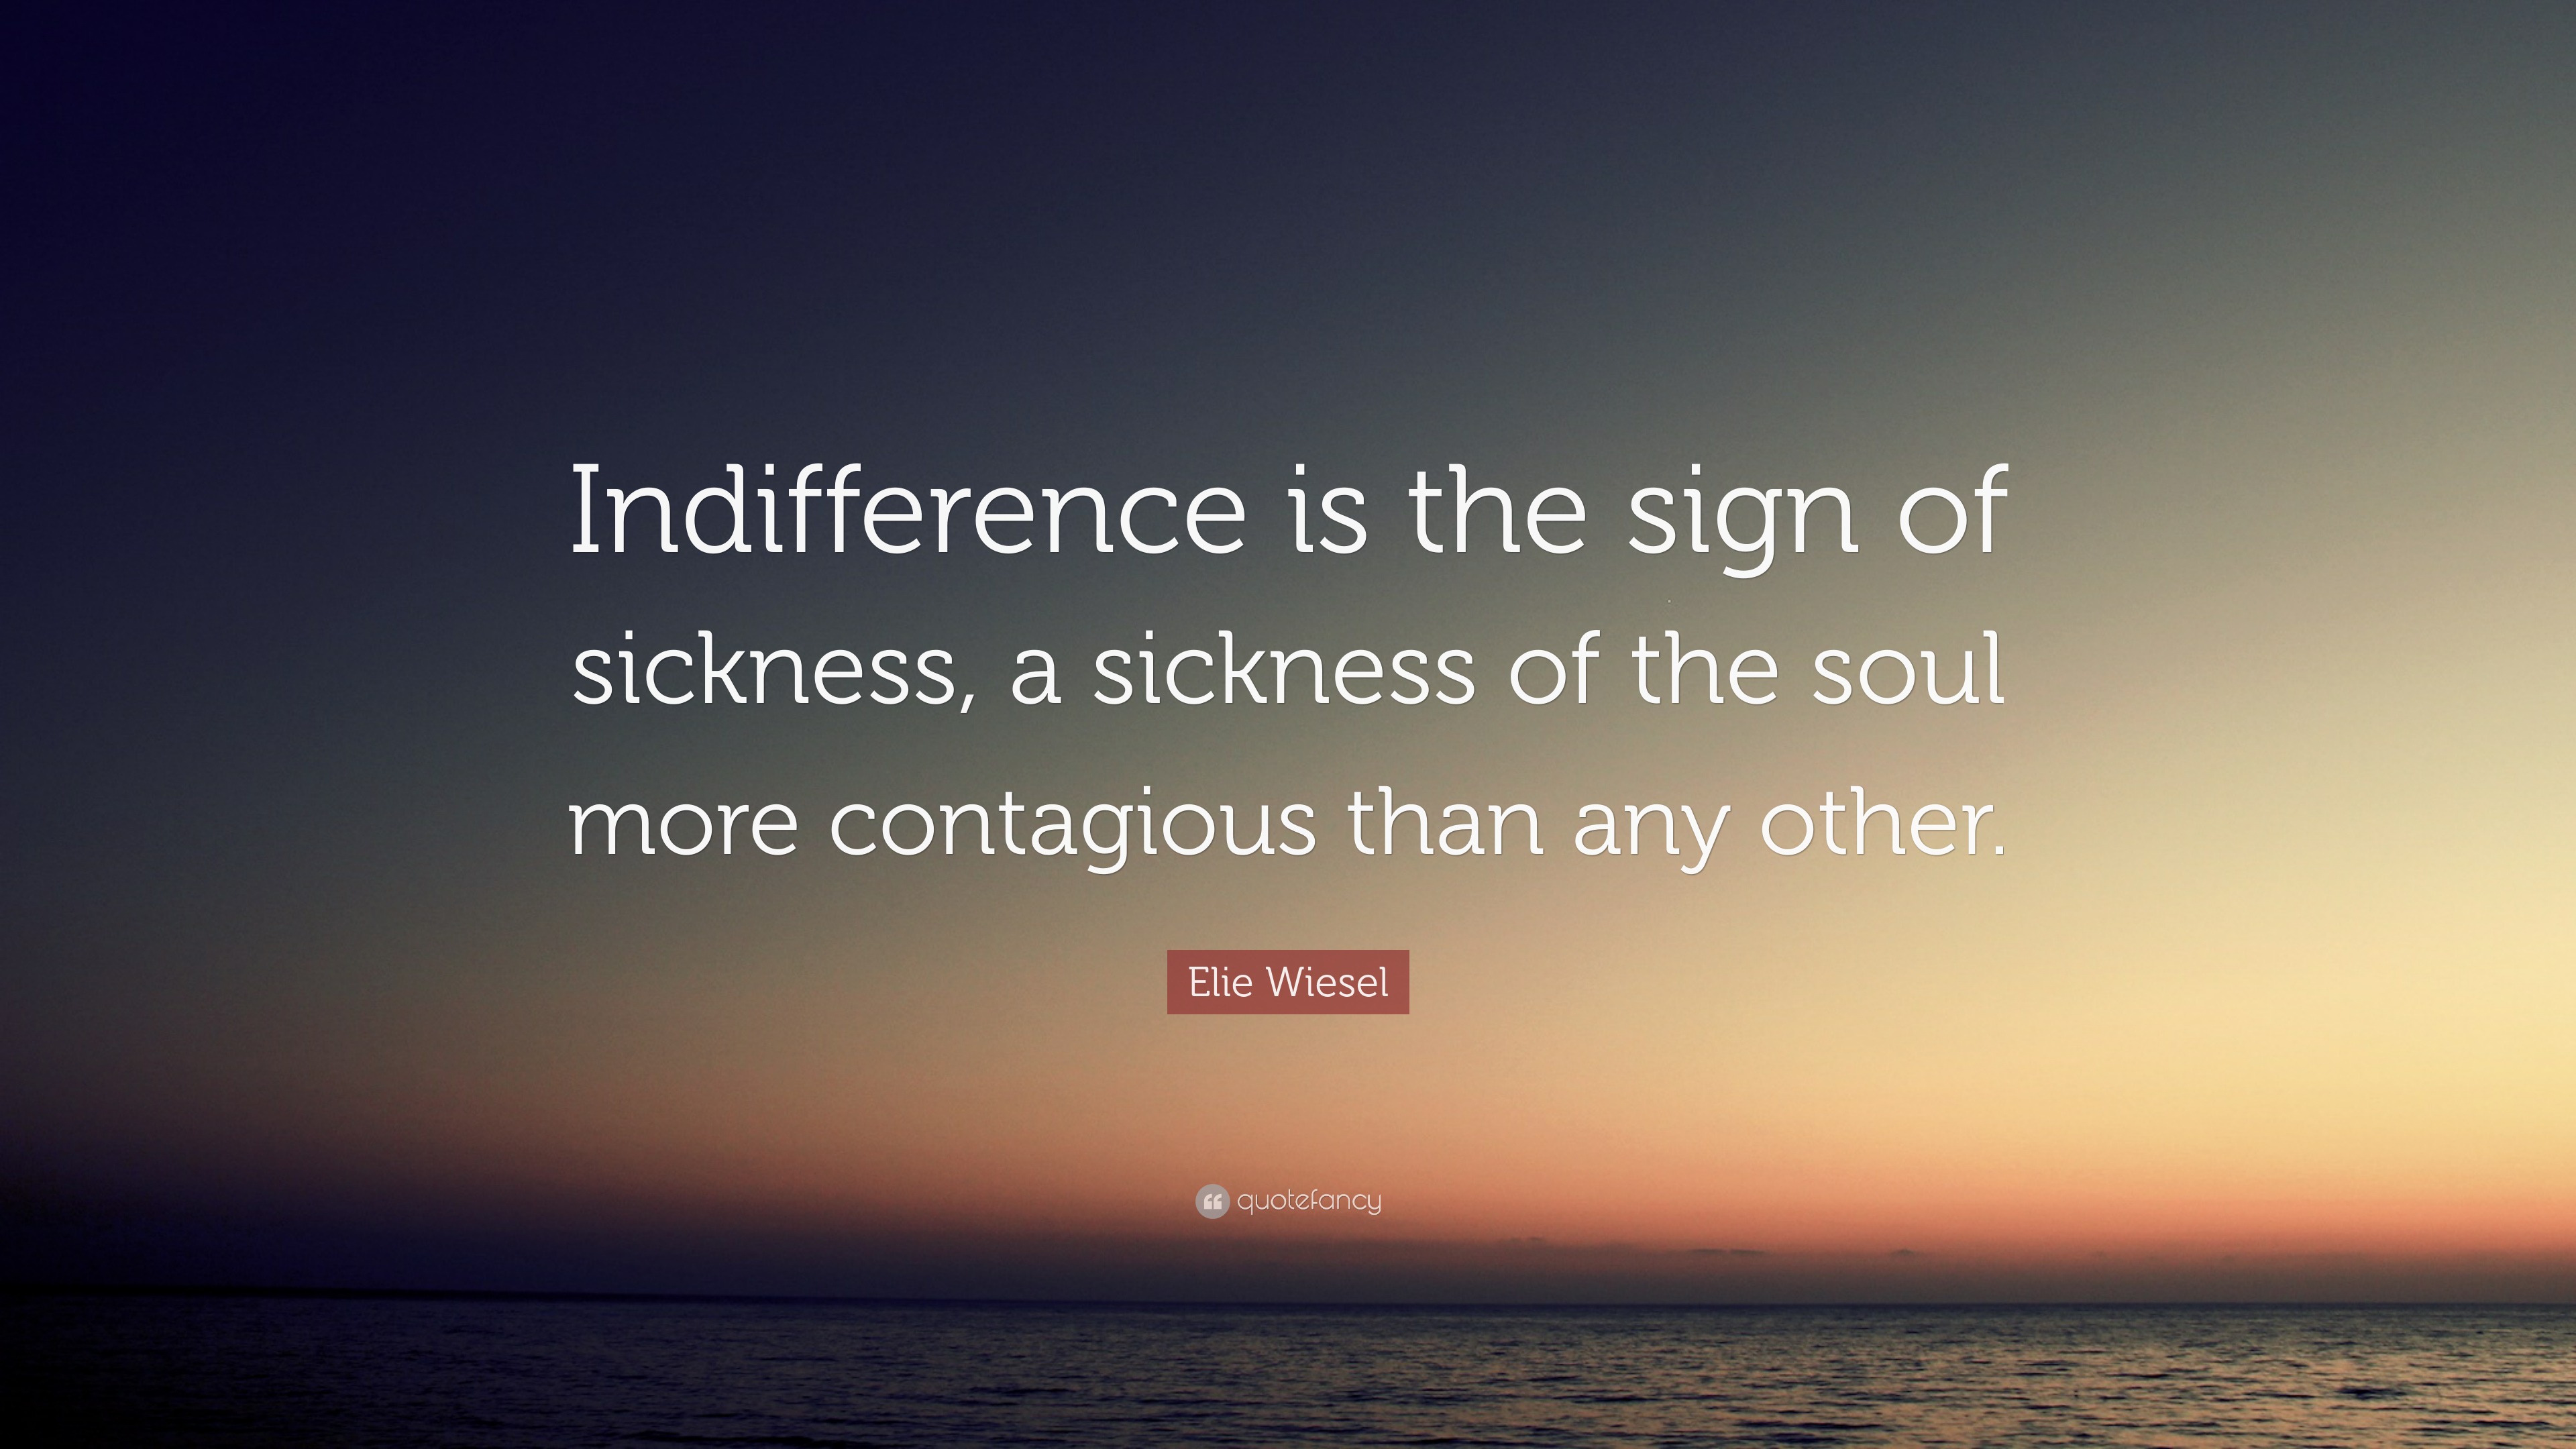 essay on indifference